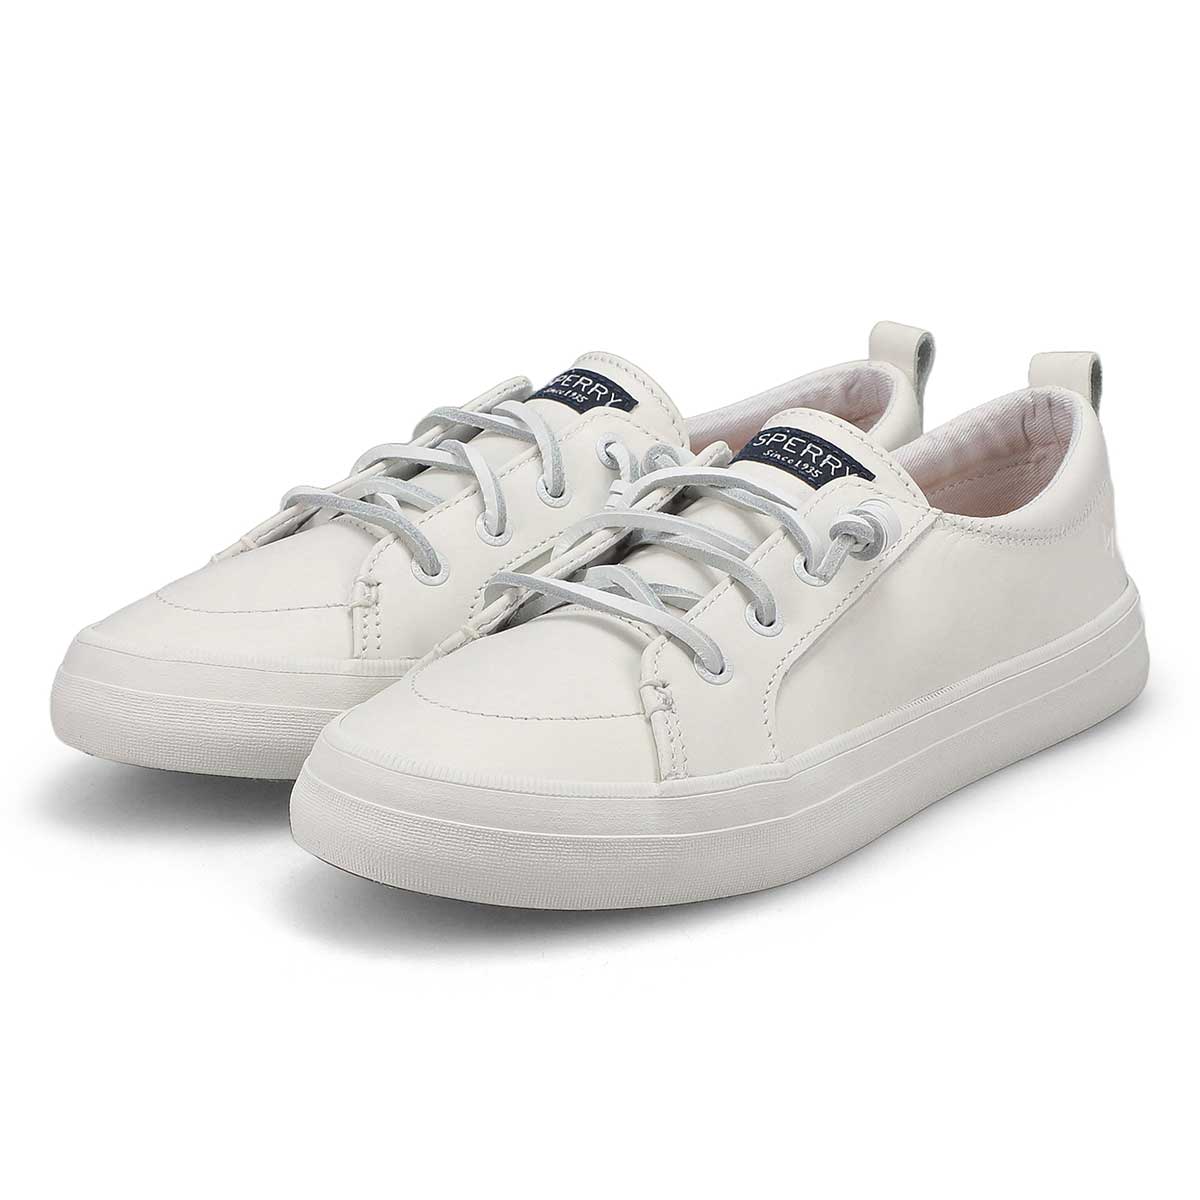 Sperry Women's Crest Vibe Leather Sneaker -Wh | SoftMoc.com